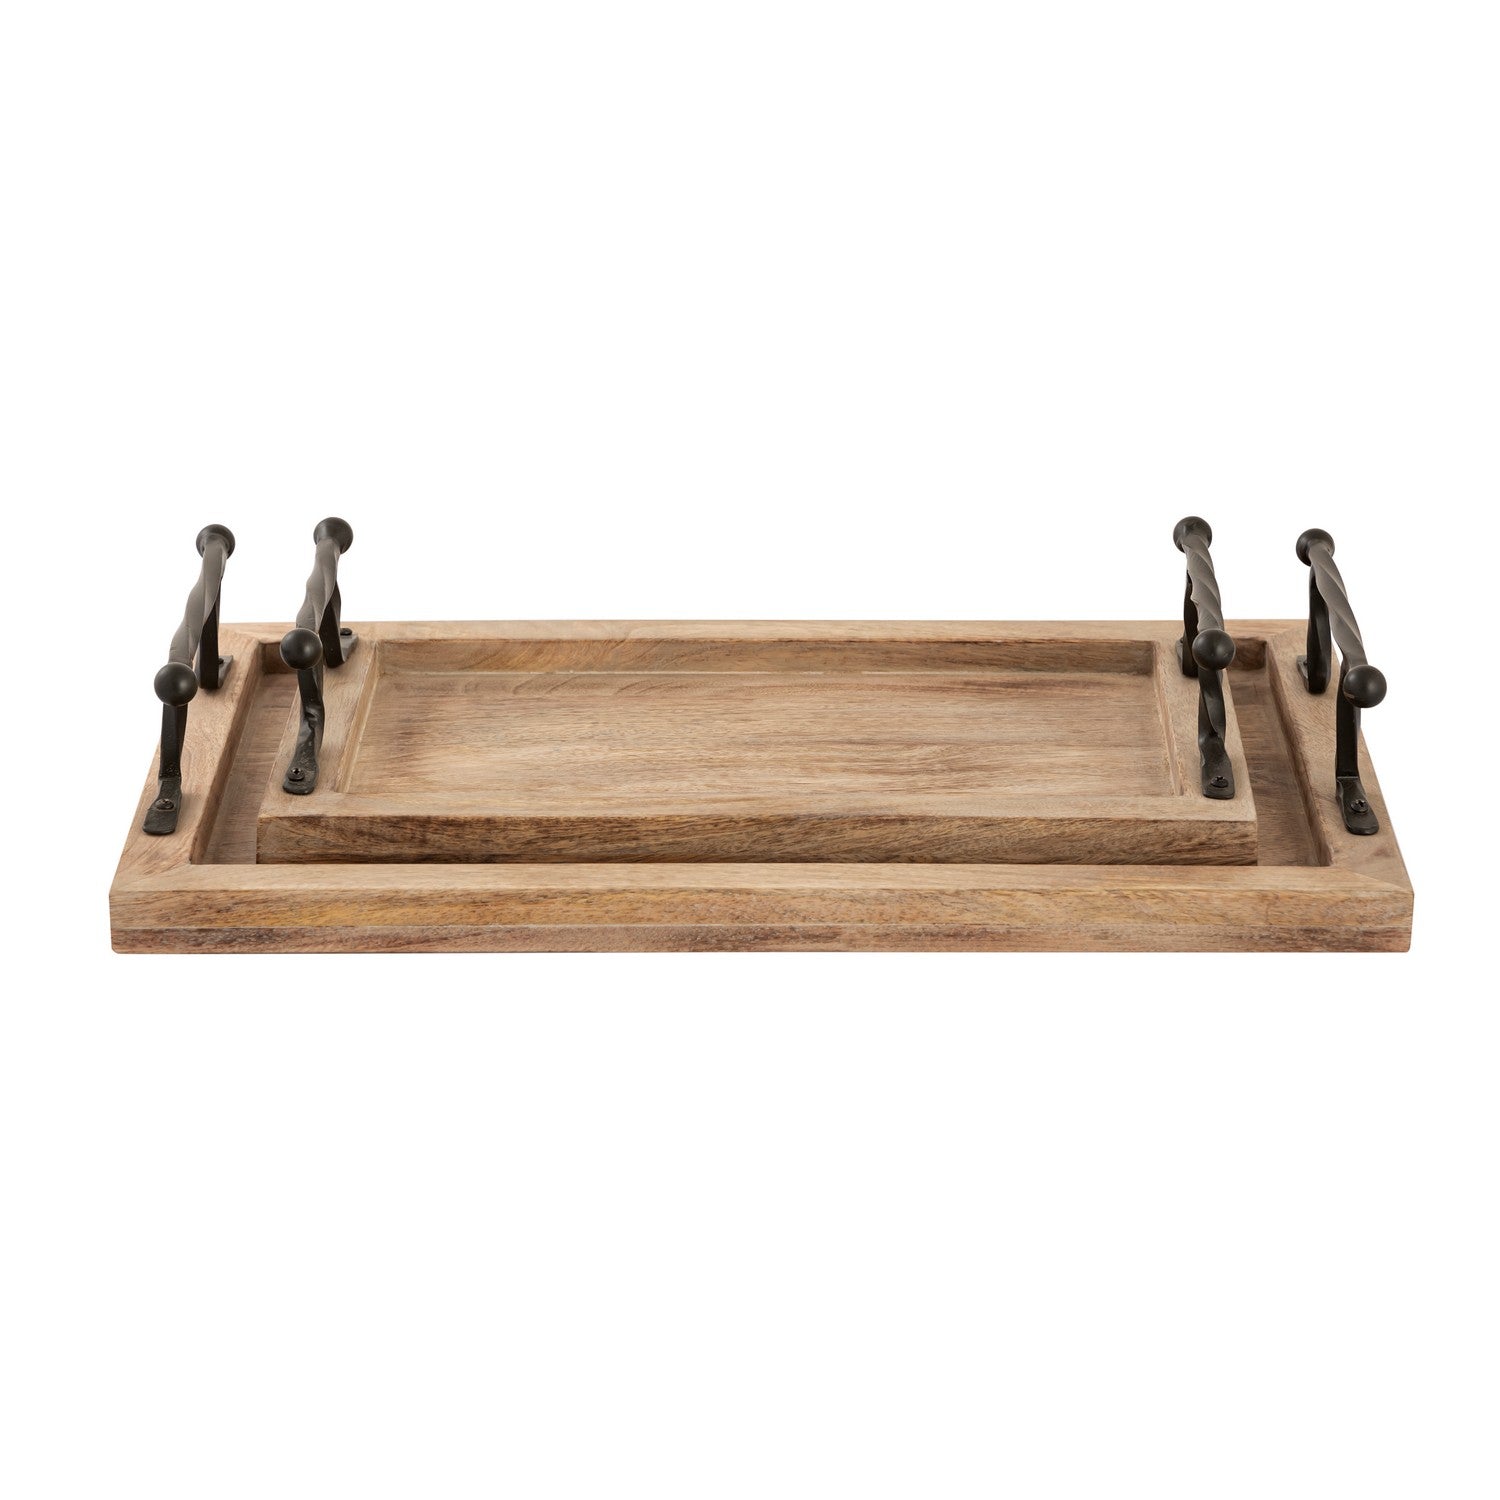 ELK Home - S0897-10687/S2 - Tray - Ellwood - Natural